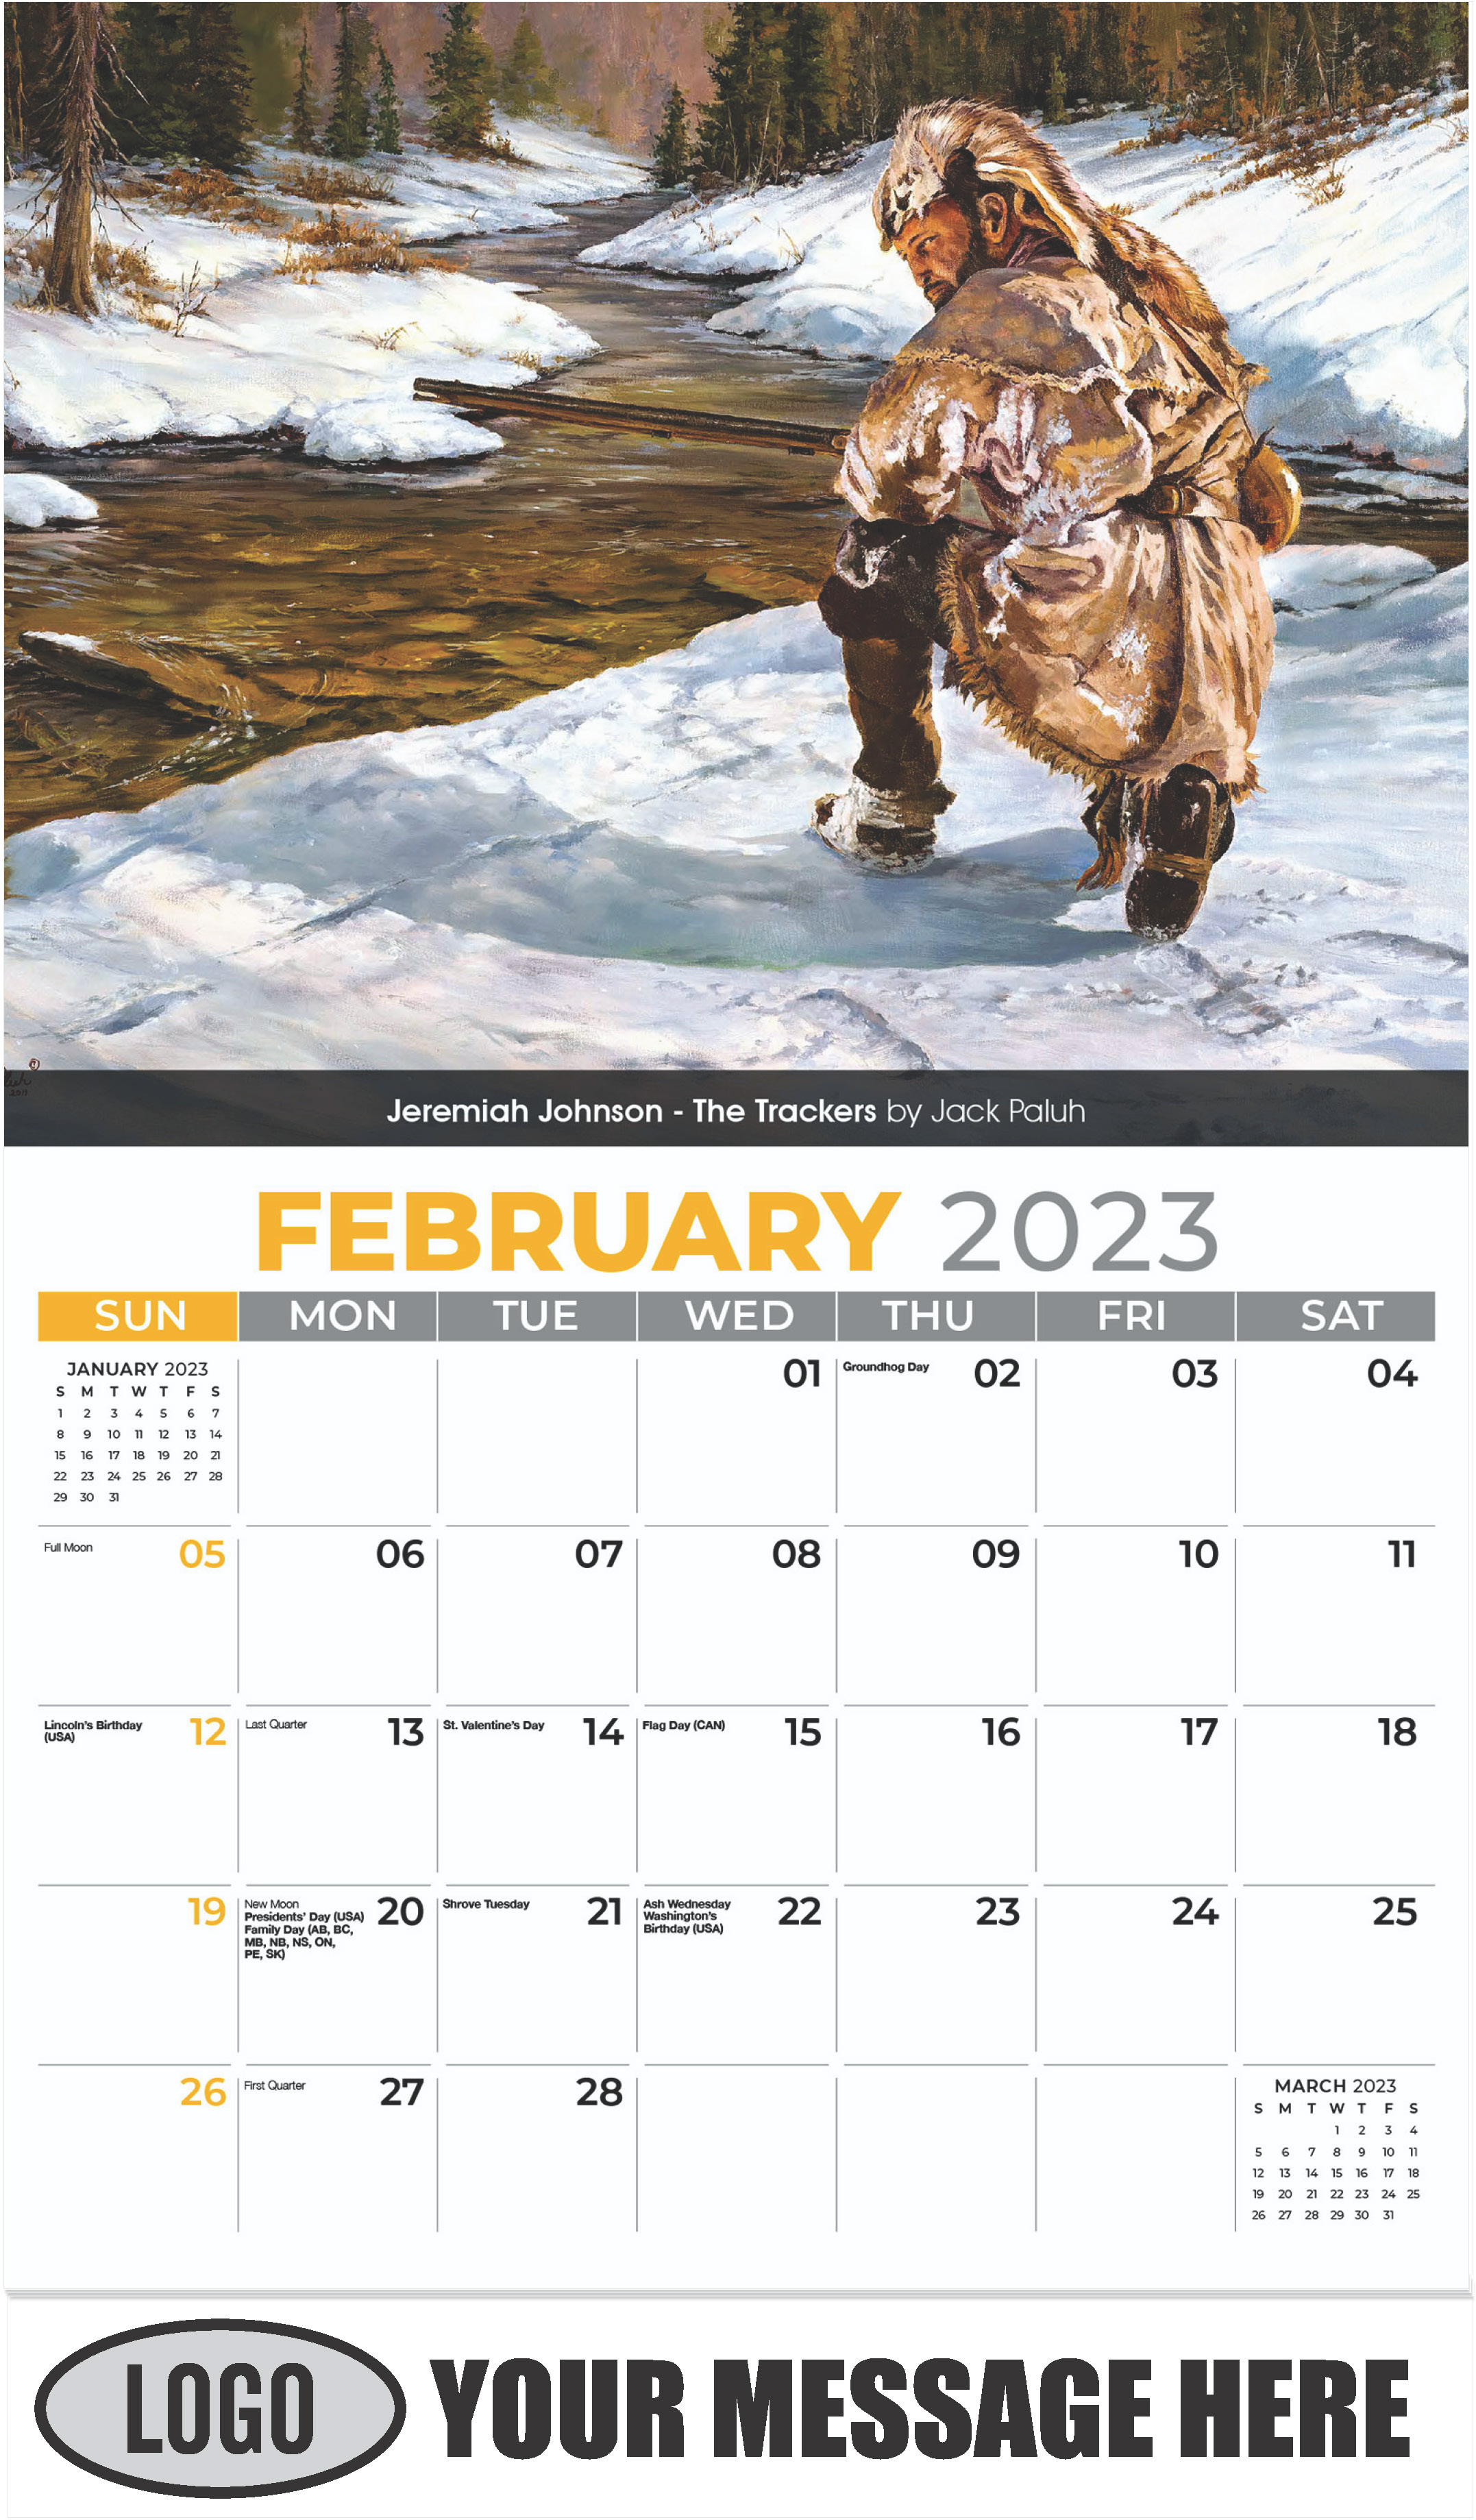 4 Jeremiah Johnson The-Trackers by Jack Paluh - February - Spirit of the West 2023 Promotional Calendar